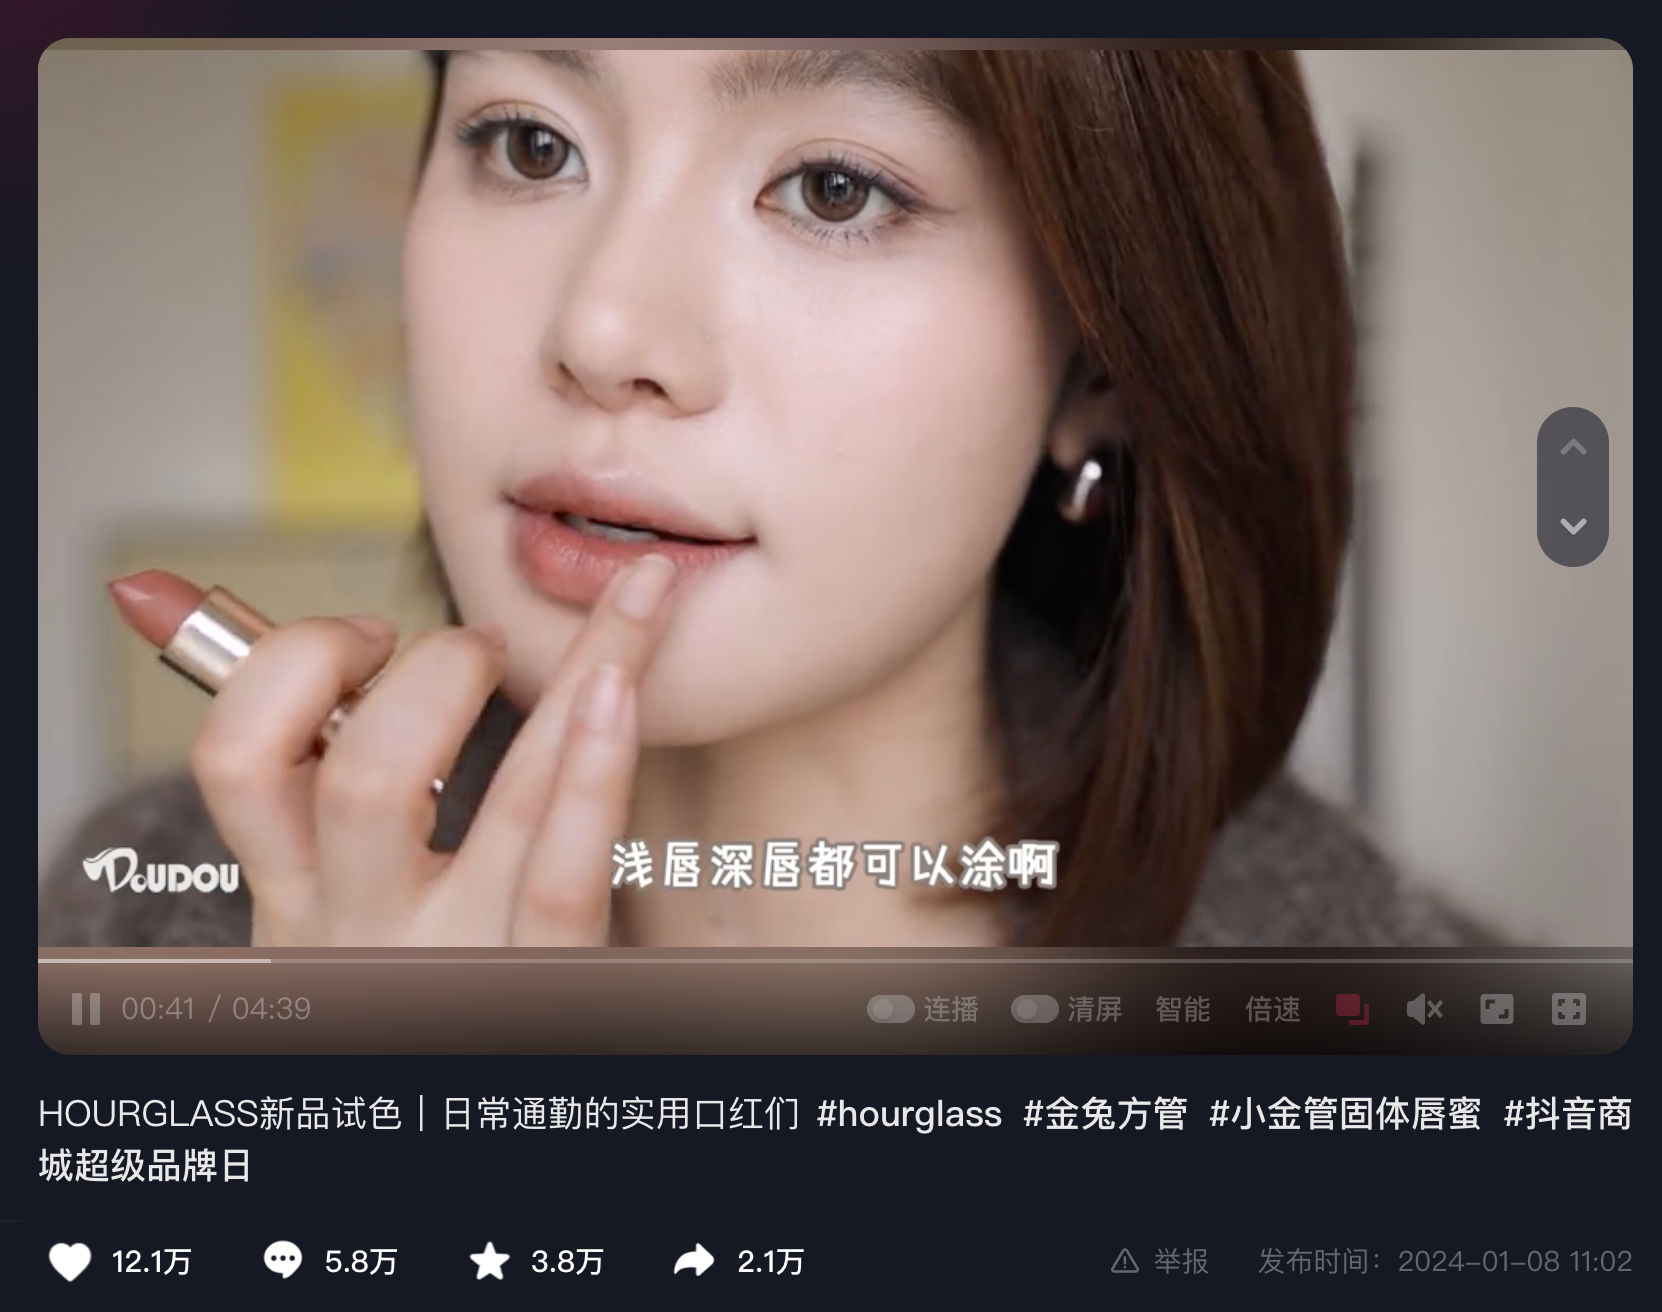 Makeup brand Hourglass secured the third position in the Beauty Leaderboards ranking by tapping into Chinese beauty KOL @豆豆_Babe. Image: Hourglass’ Douyin